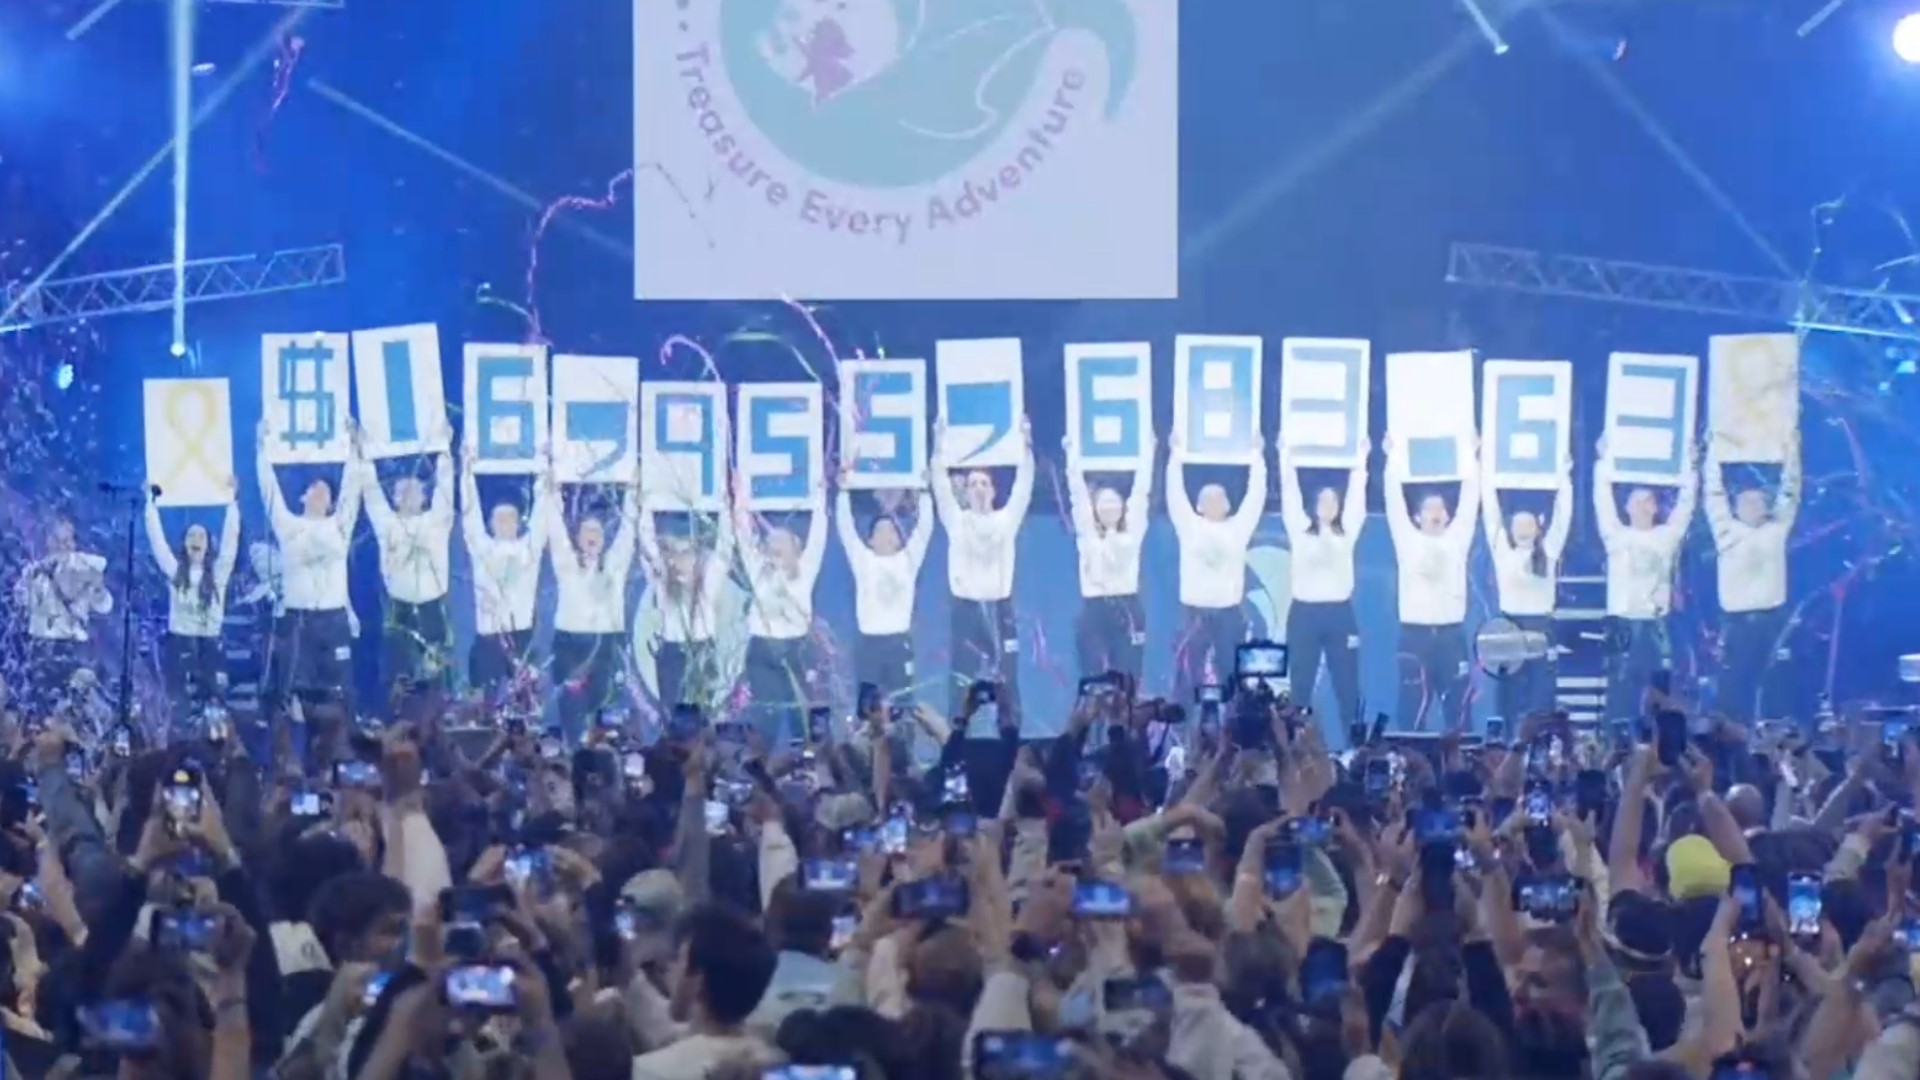 Penn State University's annual dance marathon ended this weekend with more than $16 million raised to help fight childhood cancer.